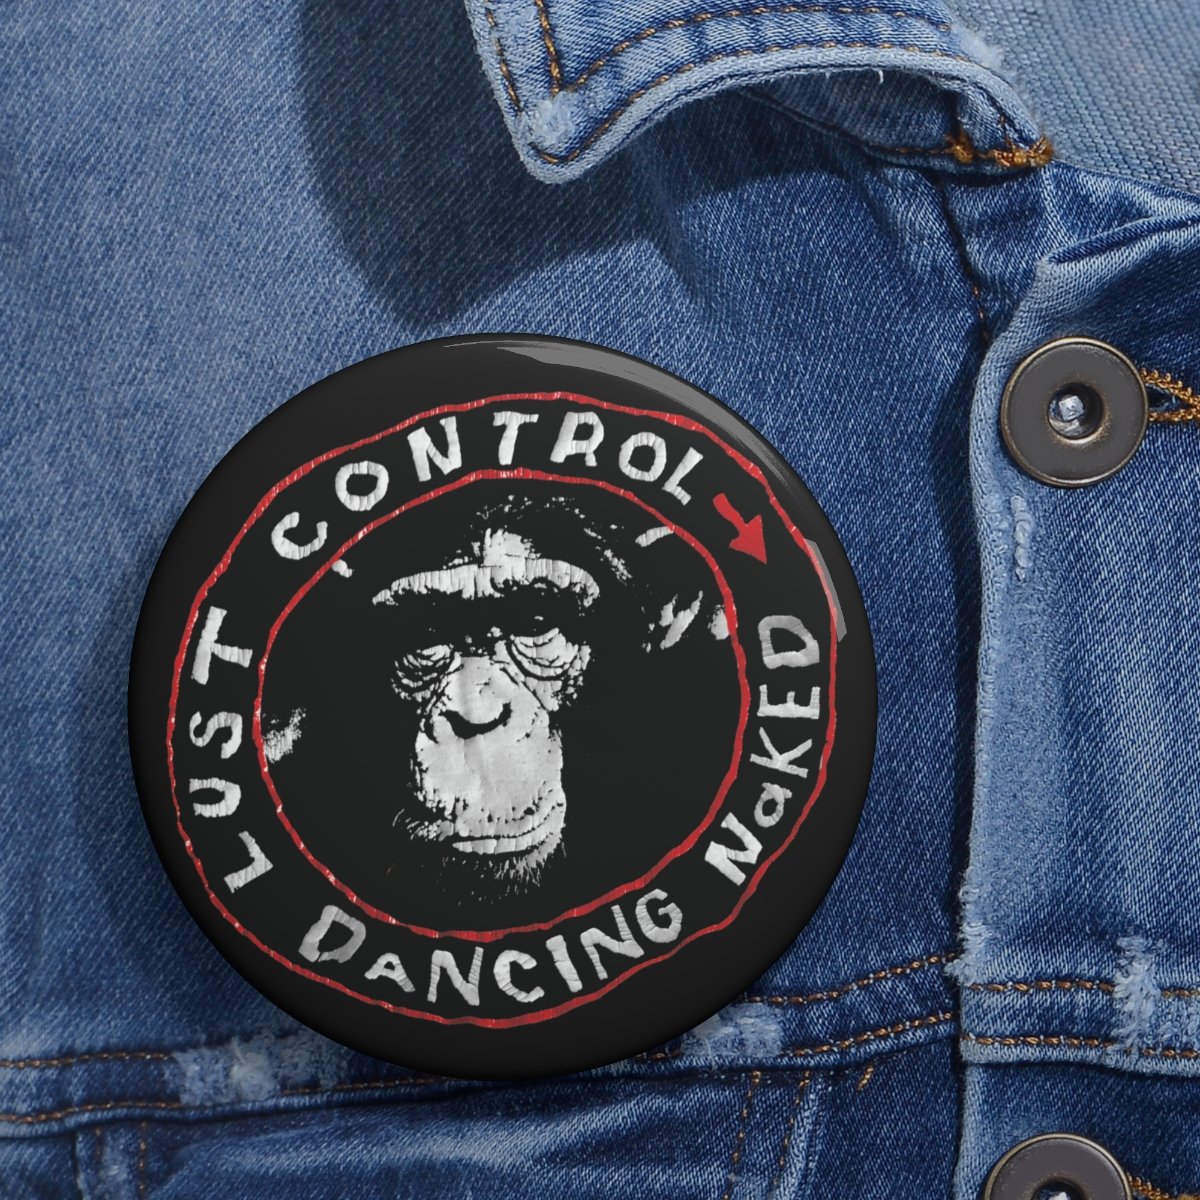 Lust Control – Dancing Naked Magazine Pin Buttons